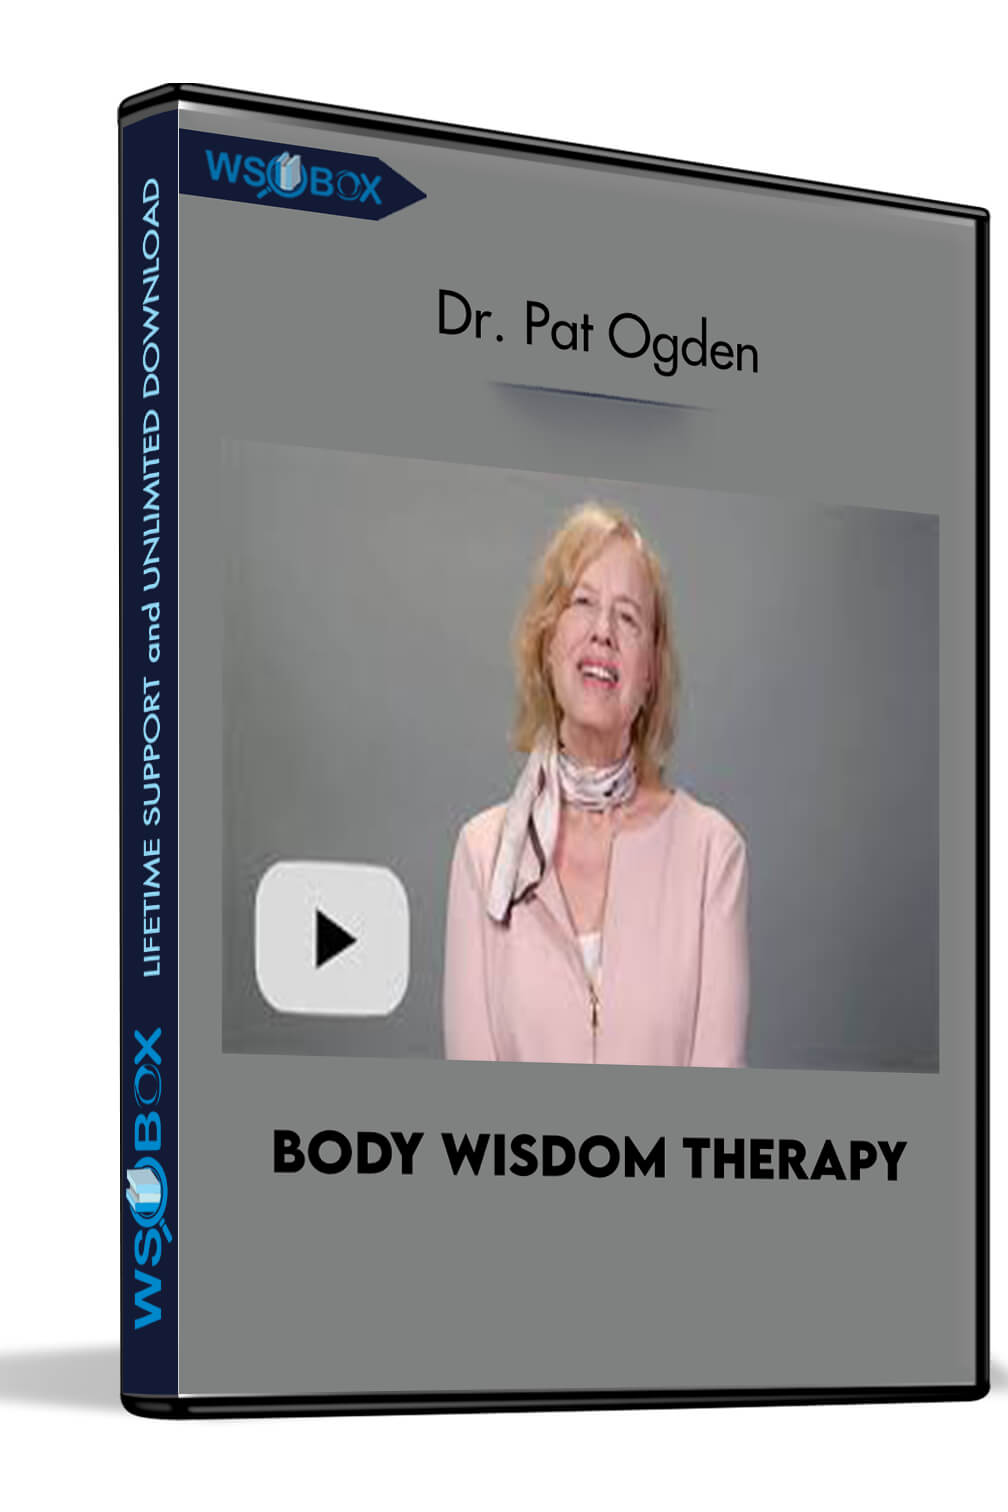 Body Wisdom Therapy – Dr. Pat Ogden